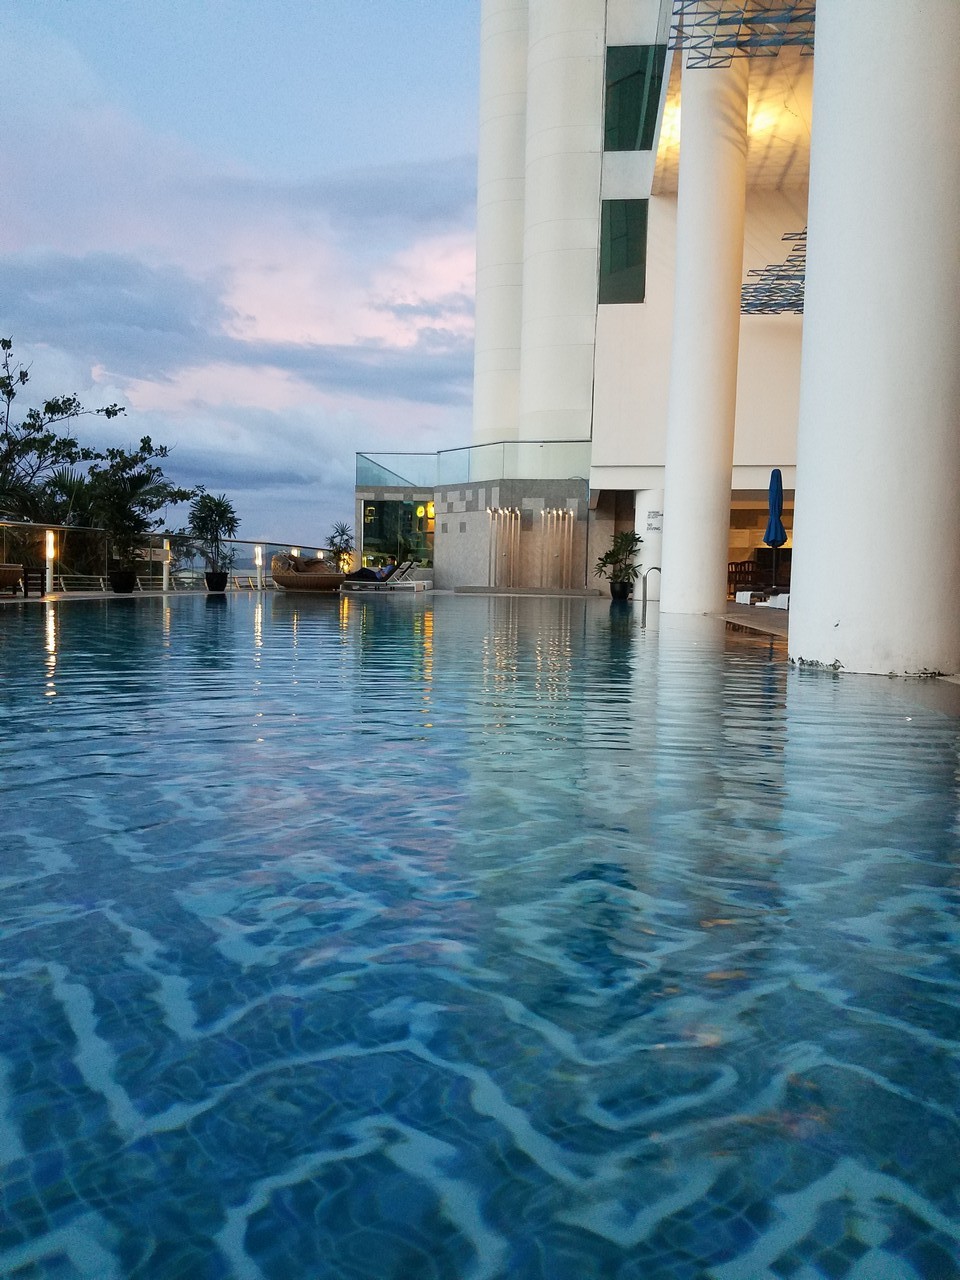 What's a vacation without switching hotels every day? Looking to requalify for Hyatt Diamond, I switched to Le Meridien for one night and am glad that I did.